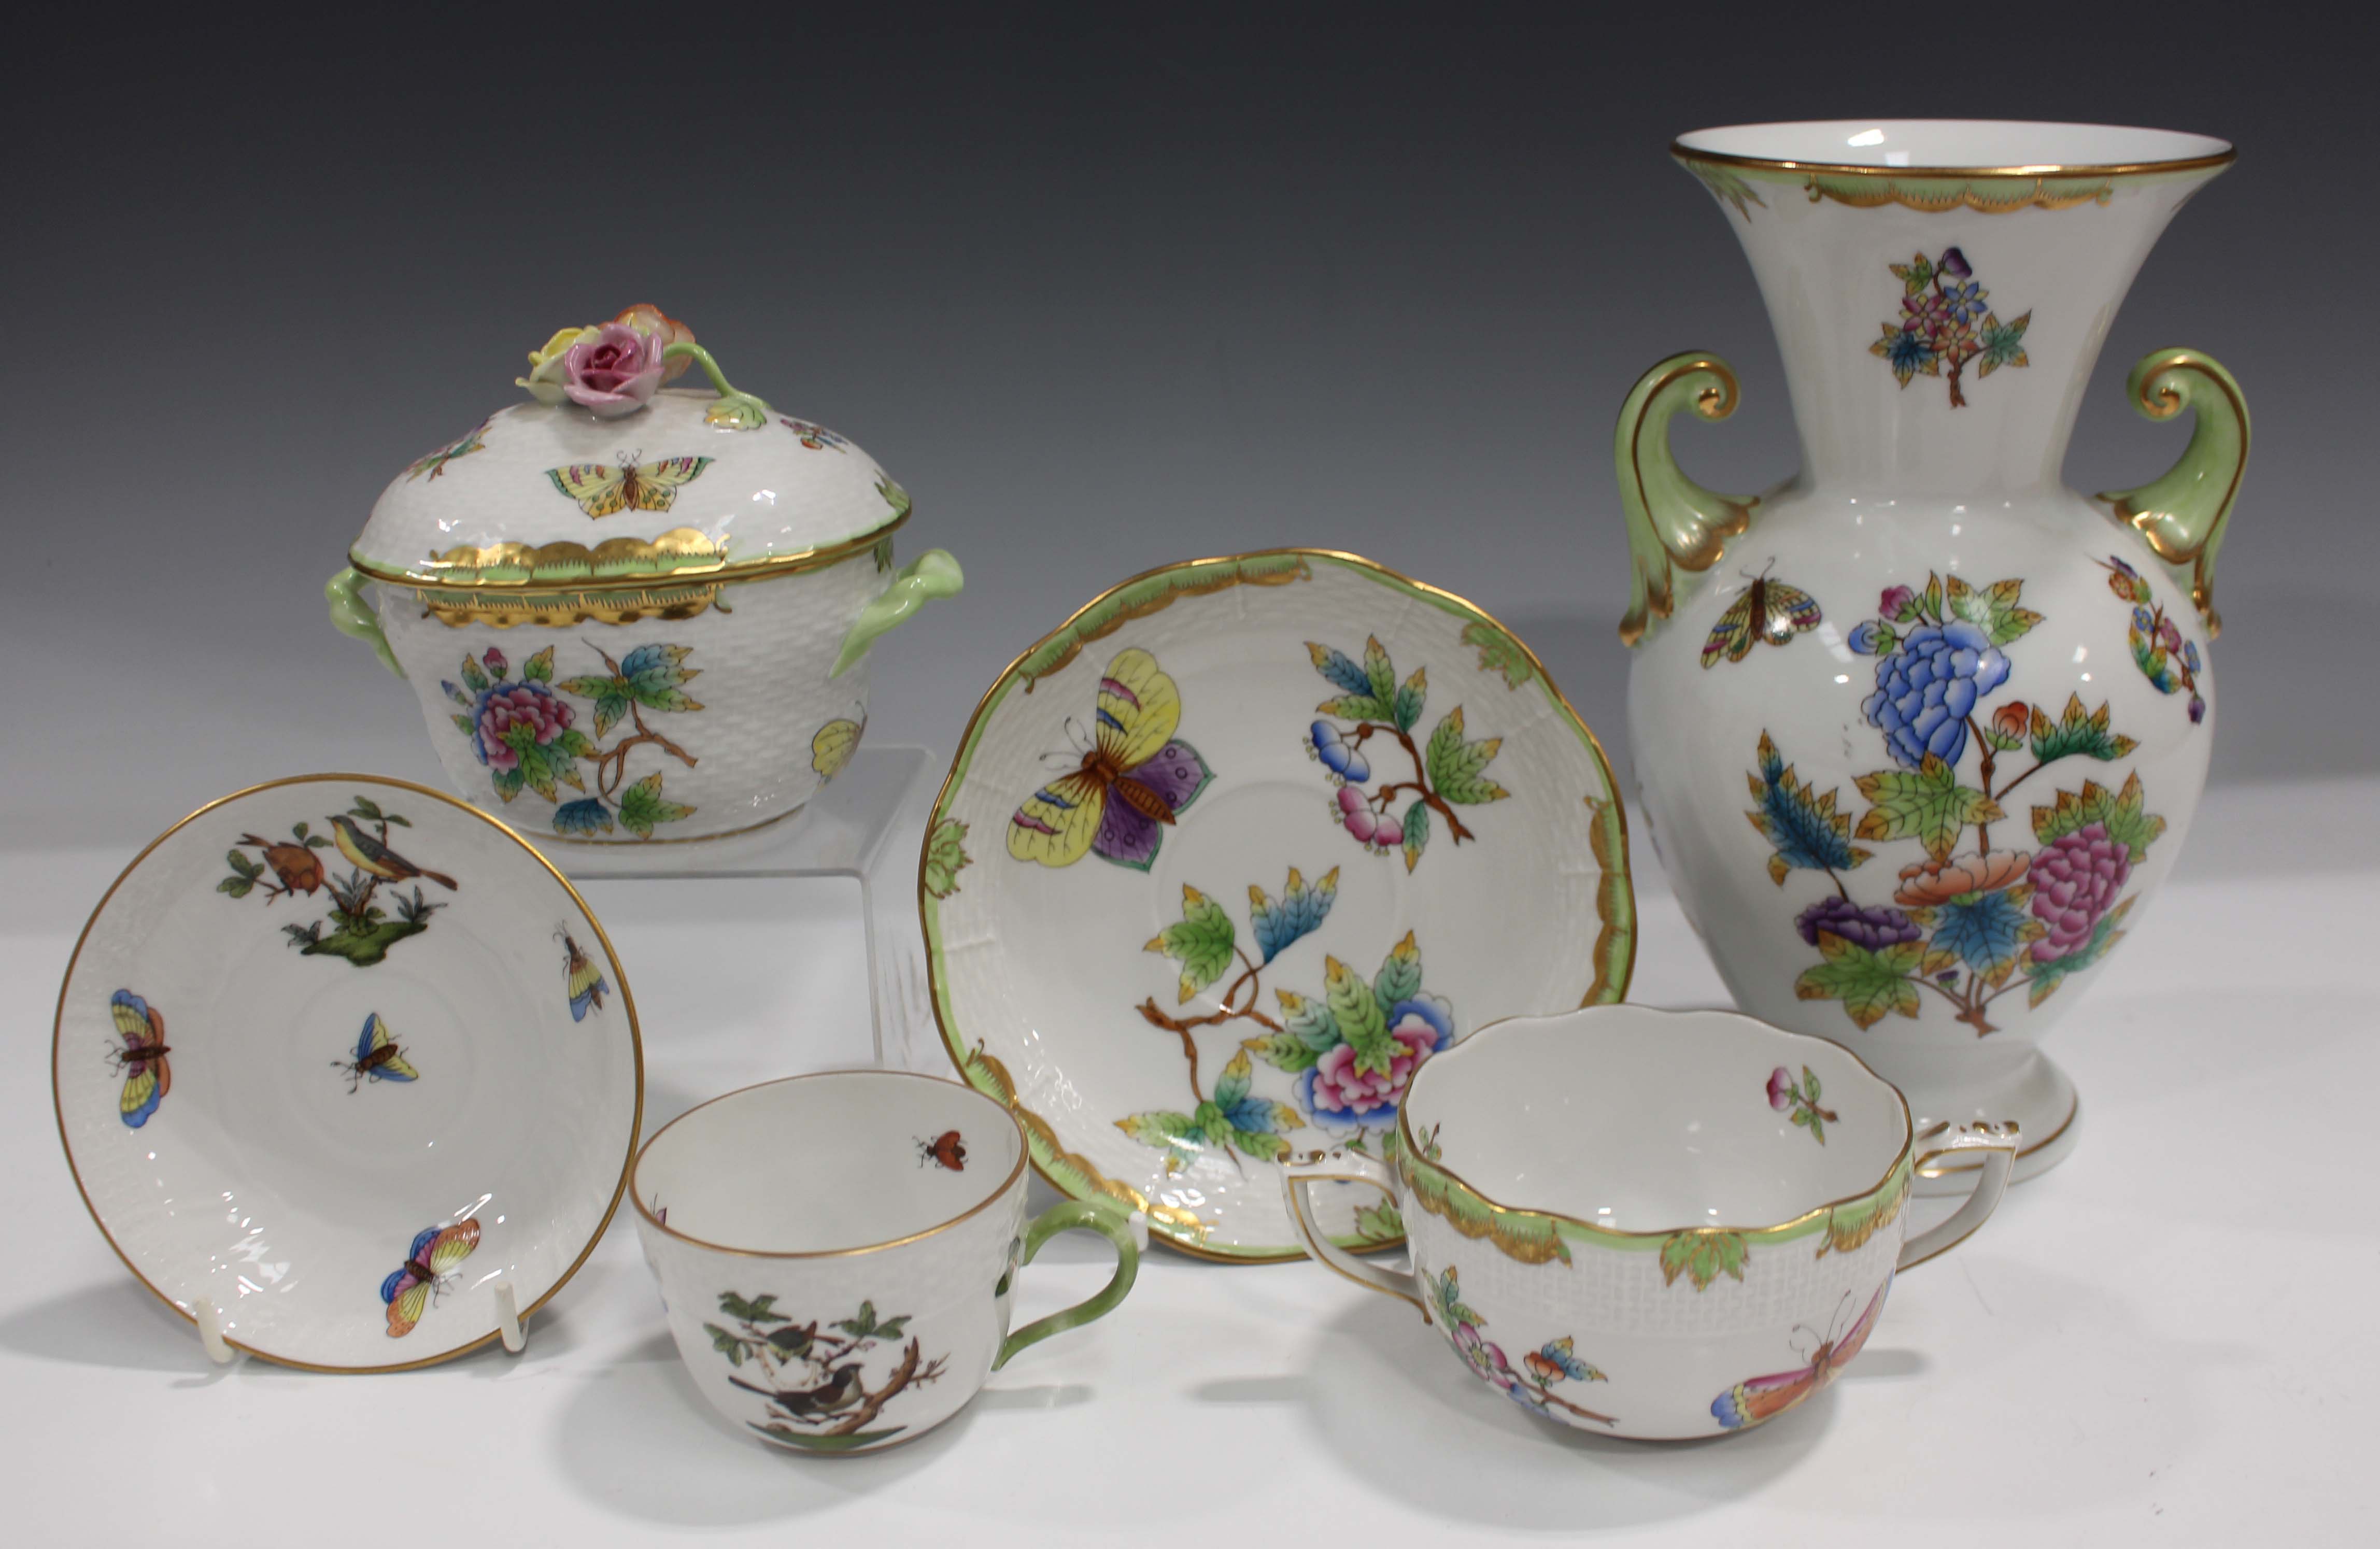 A small group of Herend porcelain, painted with butterflies and flowers in the Victoria pattern,